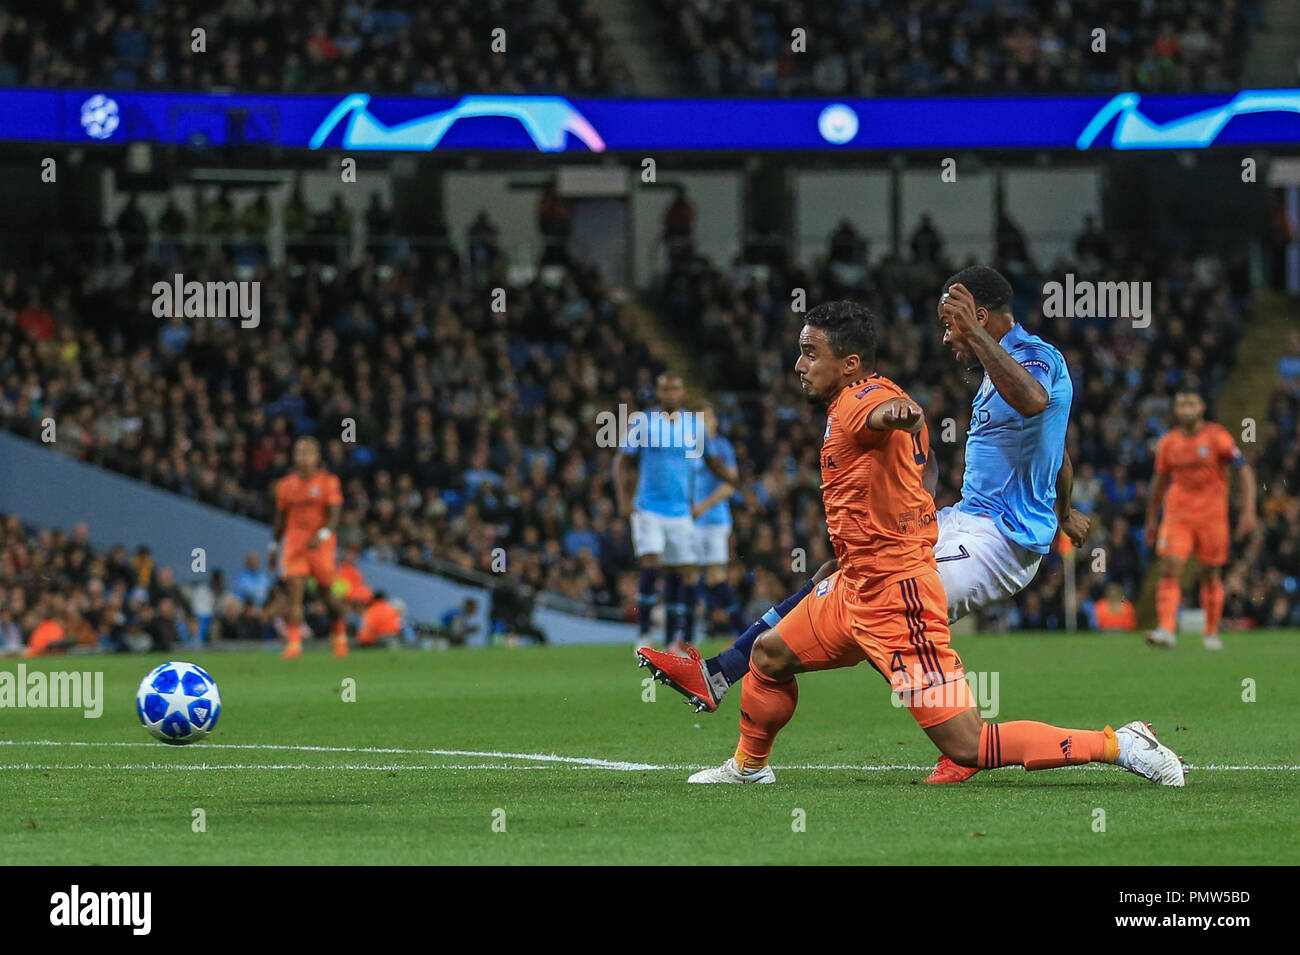 London, UK. 19th September 2018, Etihad Stadium, London, England; UEFA Champions League, Manchester City v Lyon; Raheem Sterling (07) of Manchester City shoots on goal and it's saved by Anthony Lopes (01) of Lyon   Credit: Mark Cosgrove/News Images Stock Photo